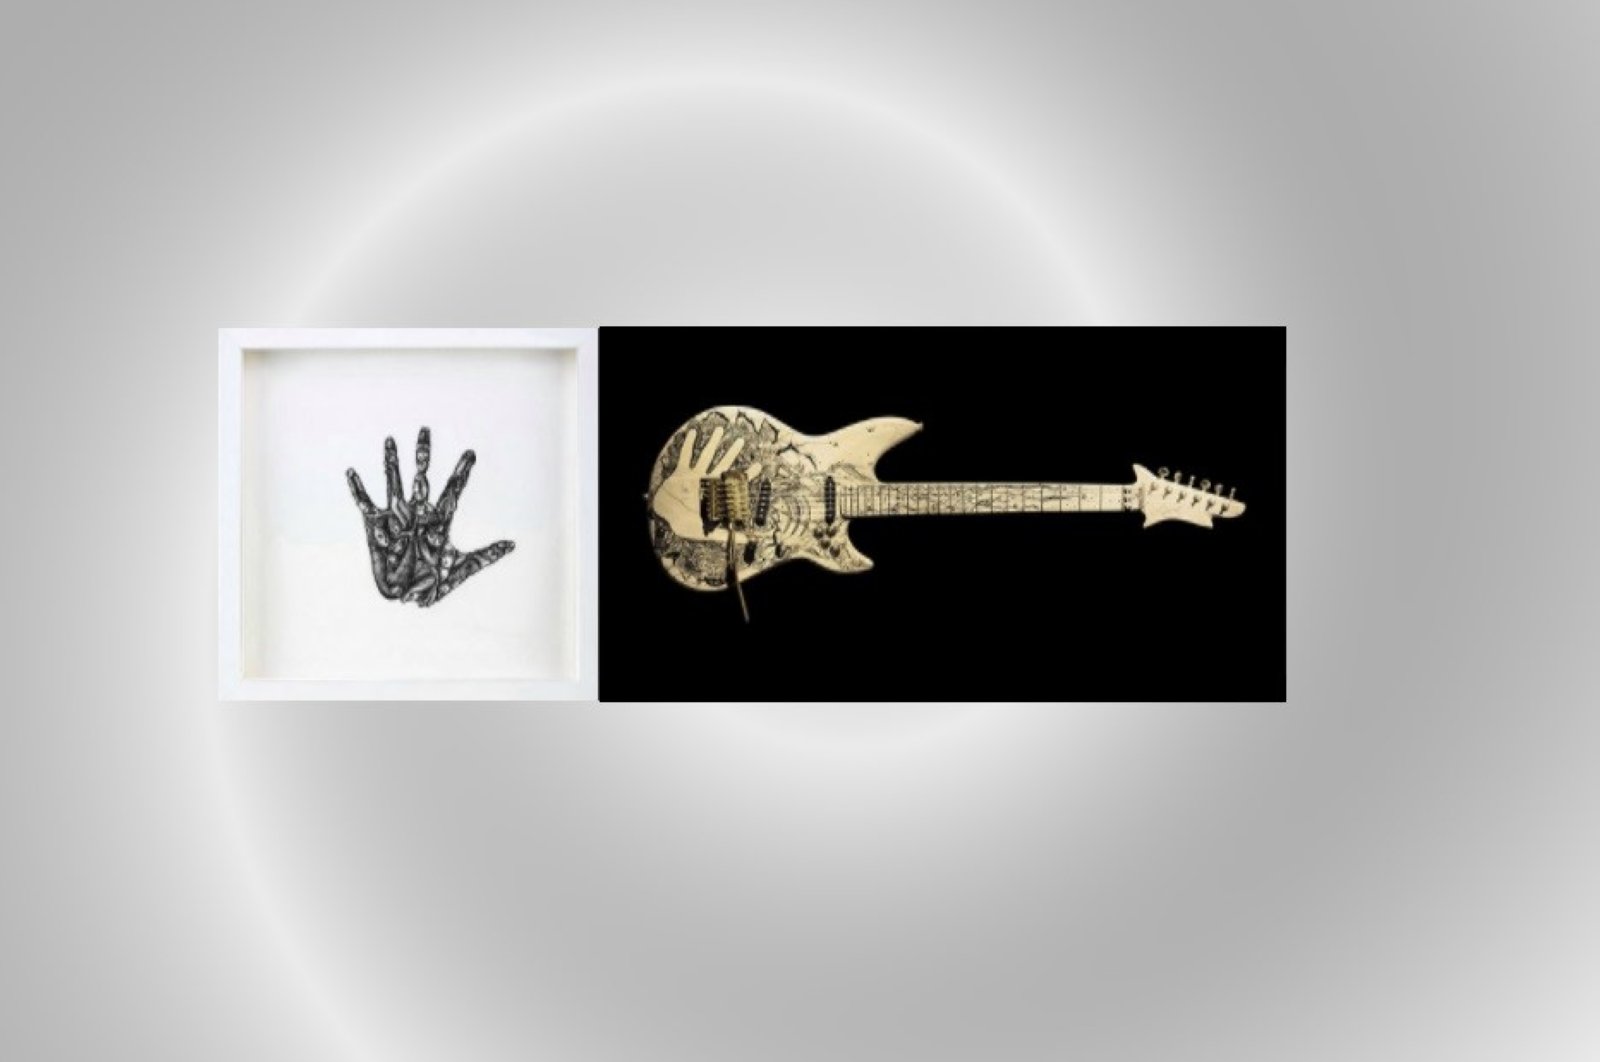 Ayça Telgeren's "Shark Guitar" at "Almost There" online exhibit. (Courtesy of British Council)